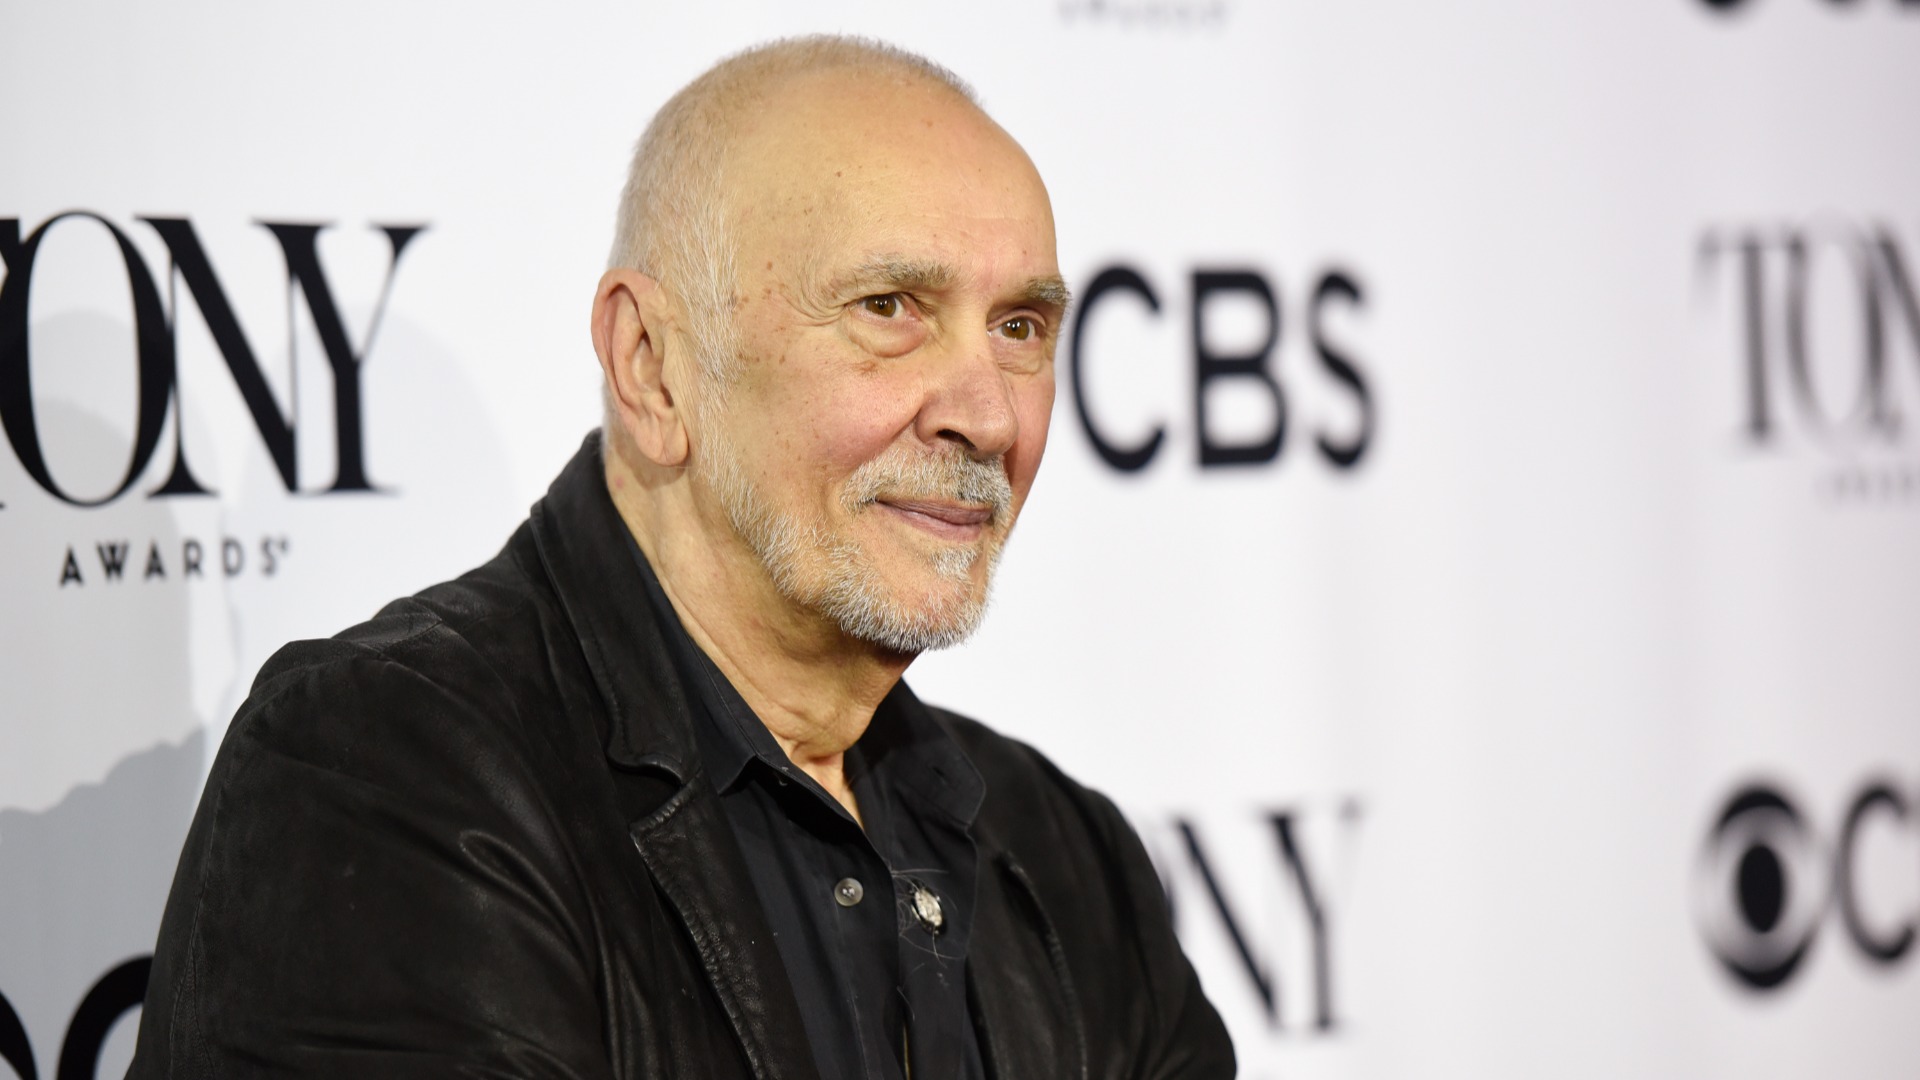 Netflix fires Frank Langella from Mike Flanagan’s new horror series following misconduct investigation